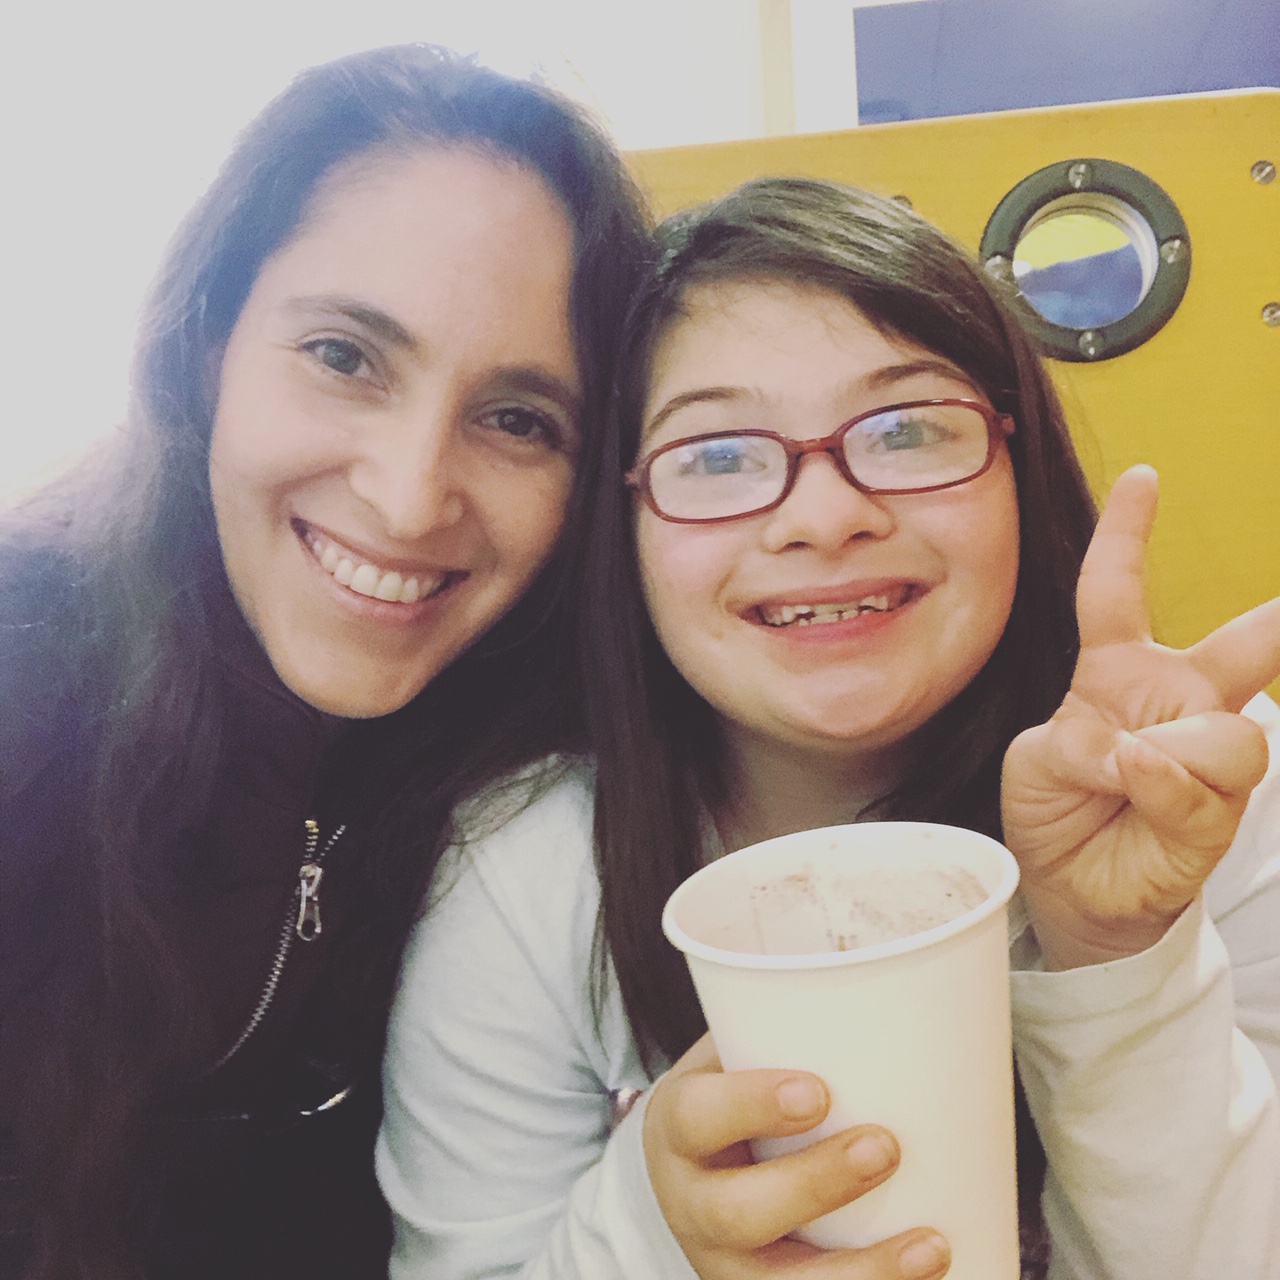 My Daughter With Down Syndrome Helps Me Become More ‘Me’